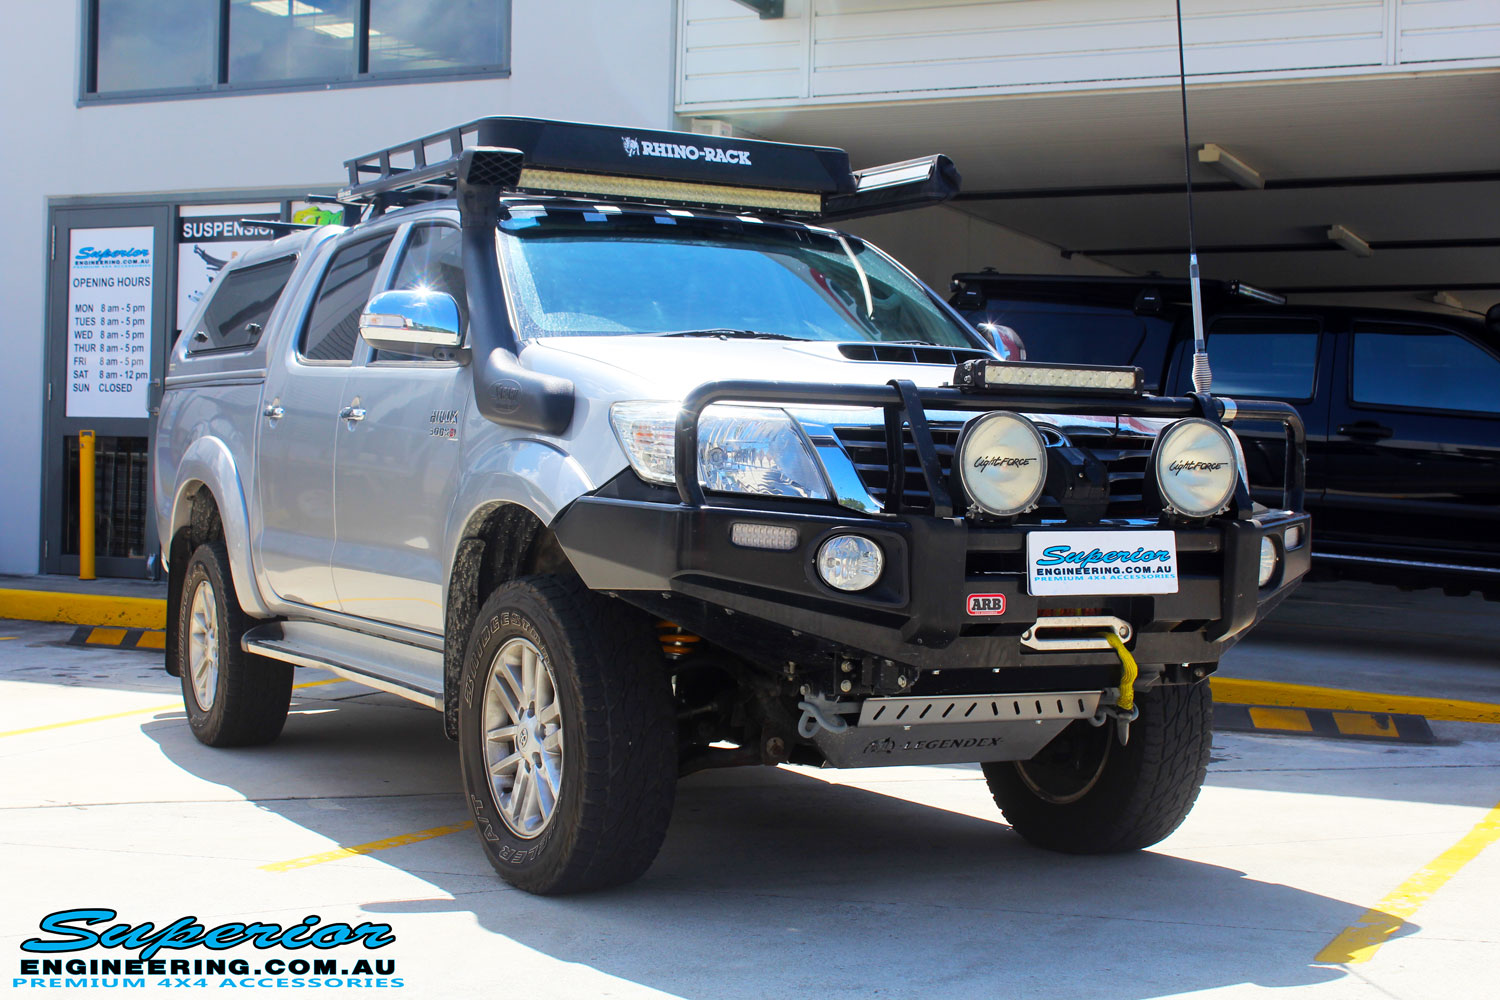 Right front side view of a Toyota Vigo Hilux Dual Cab after fitment of a Superior Remote Reservoir 2" Inch Lift Kit with King Coil Springs